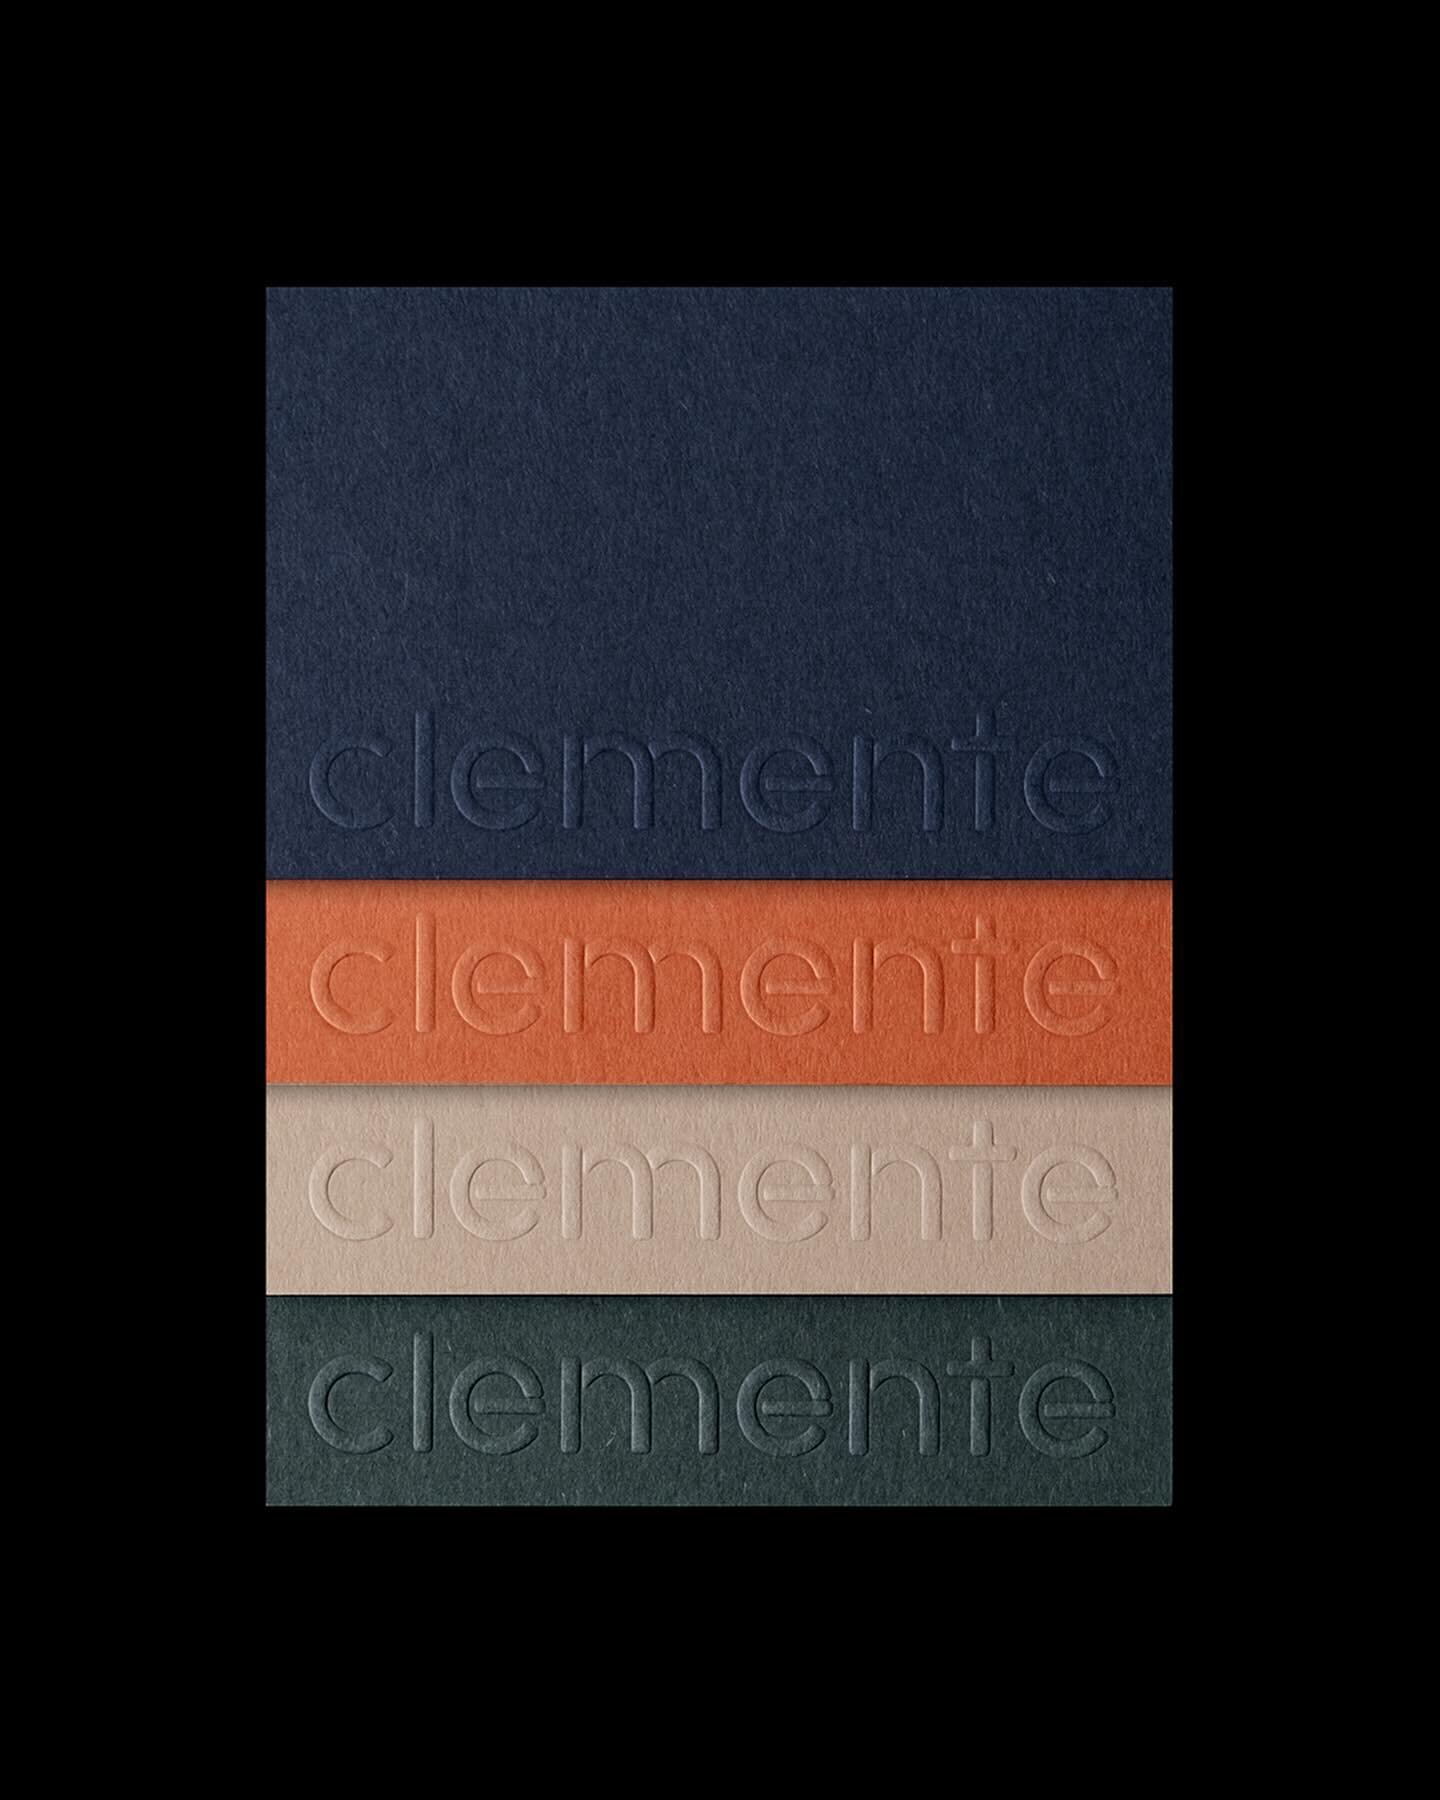 Duplexed blind embossed and foiled business cards&mdash;featuring a bespoke typeface&mdash;for Clemente, a Los Angeles-based clinical research company. Print production by @lunchpress.